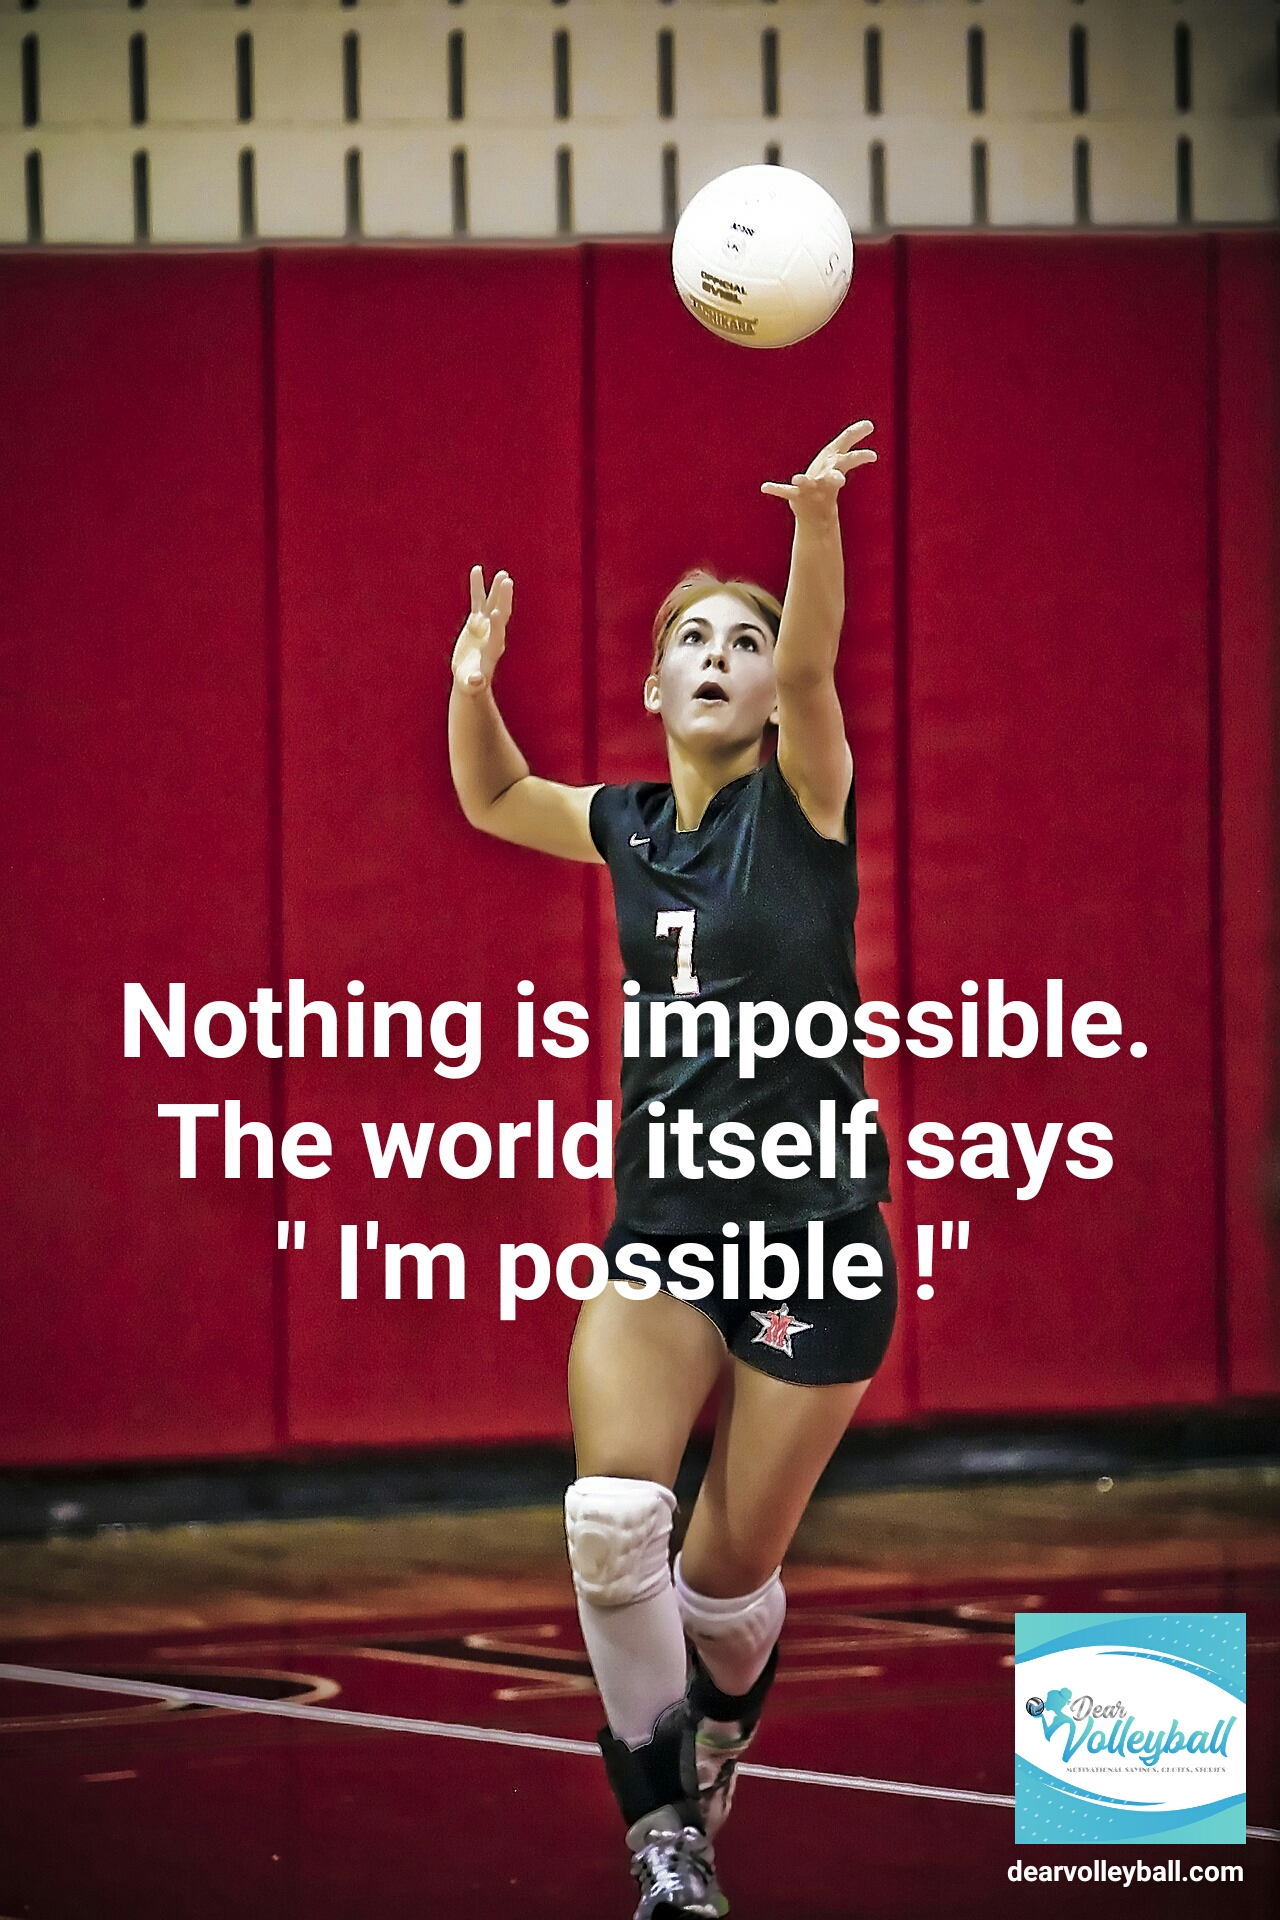 Nothing is impossible.